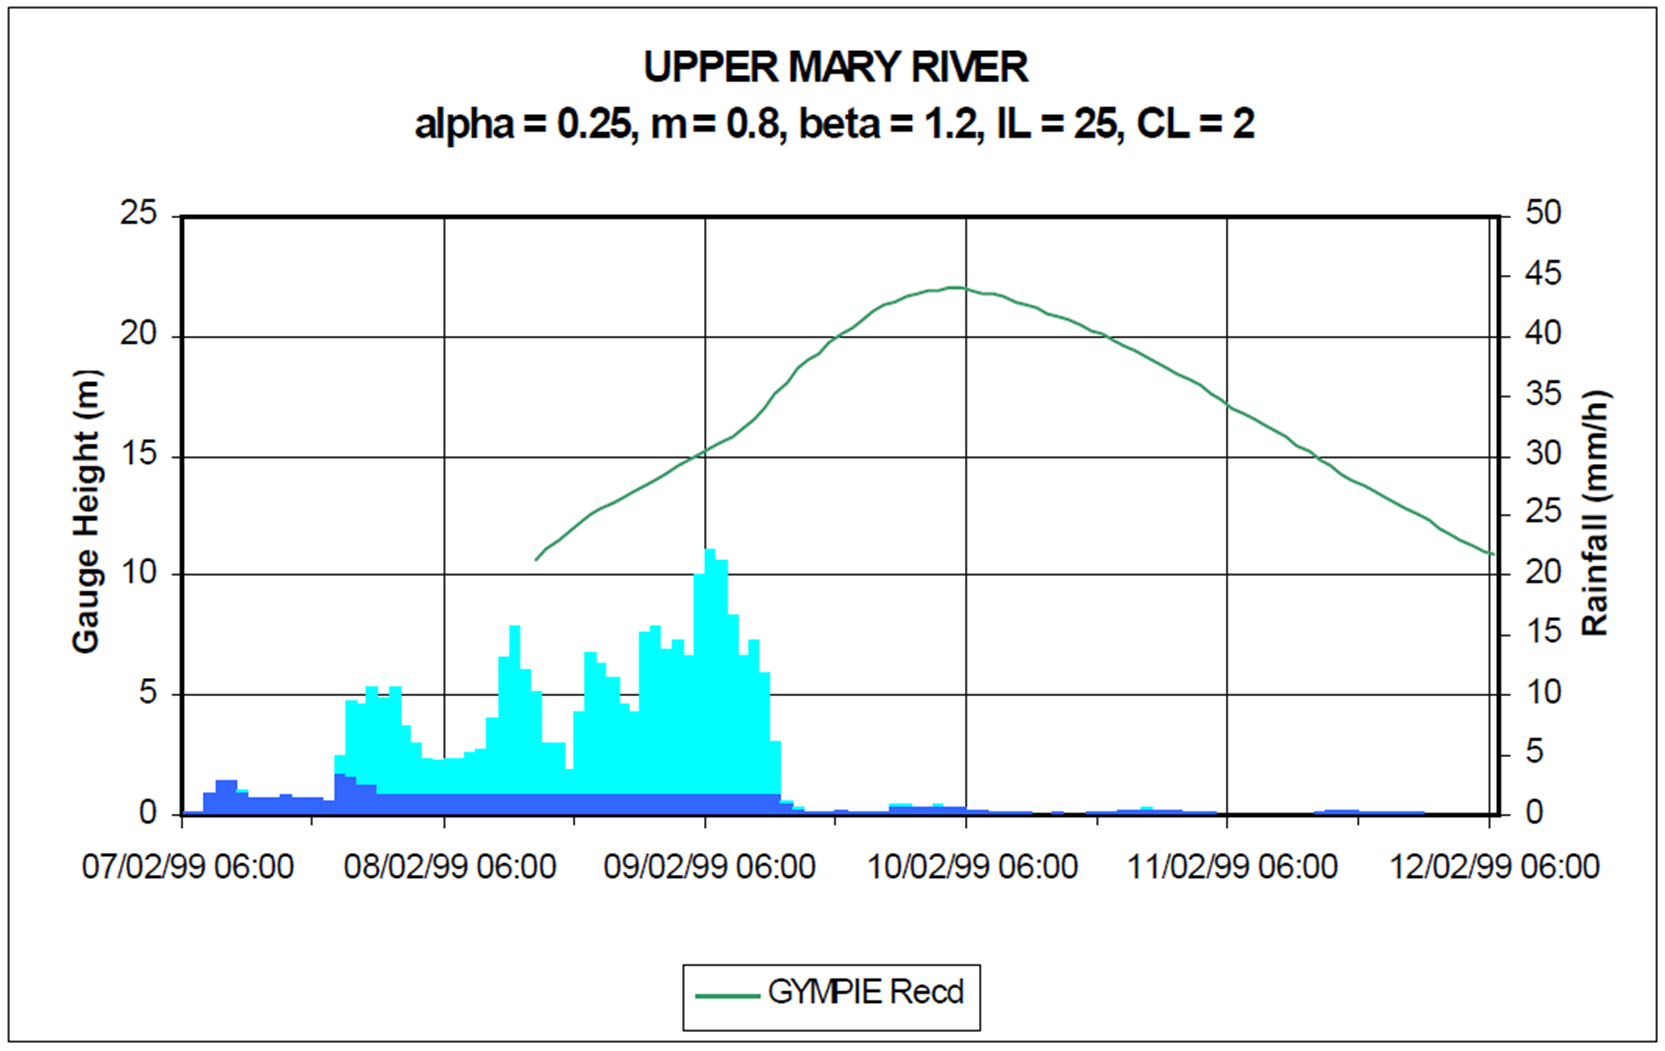 Upper Mary River - rainfall and gauge height